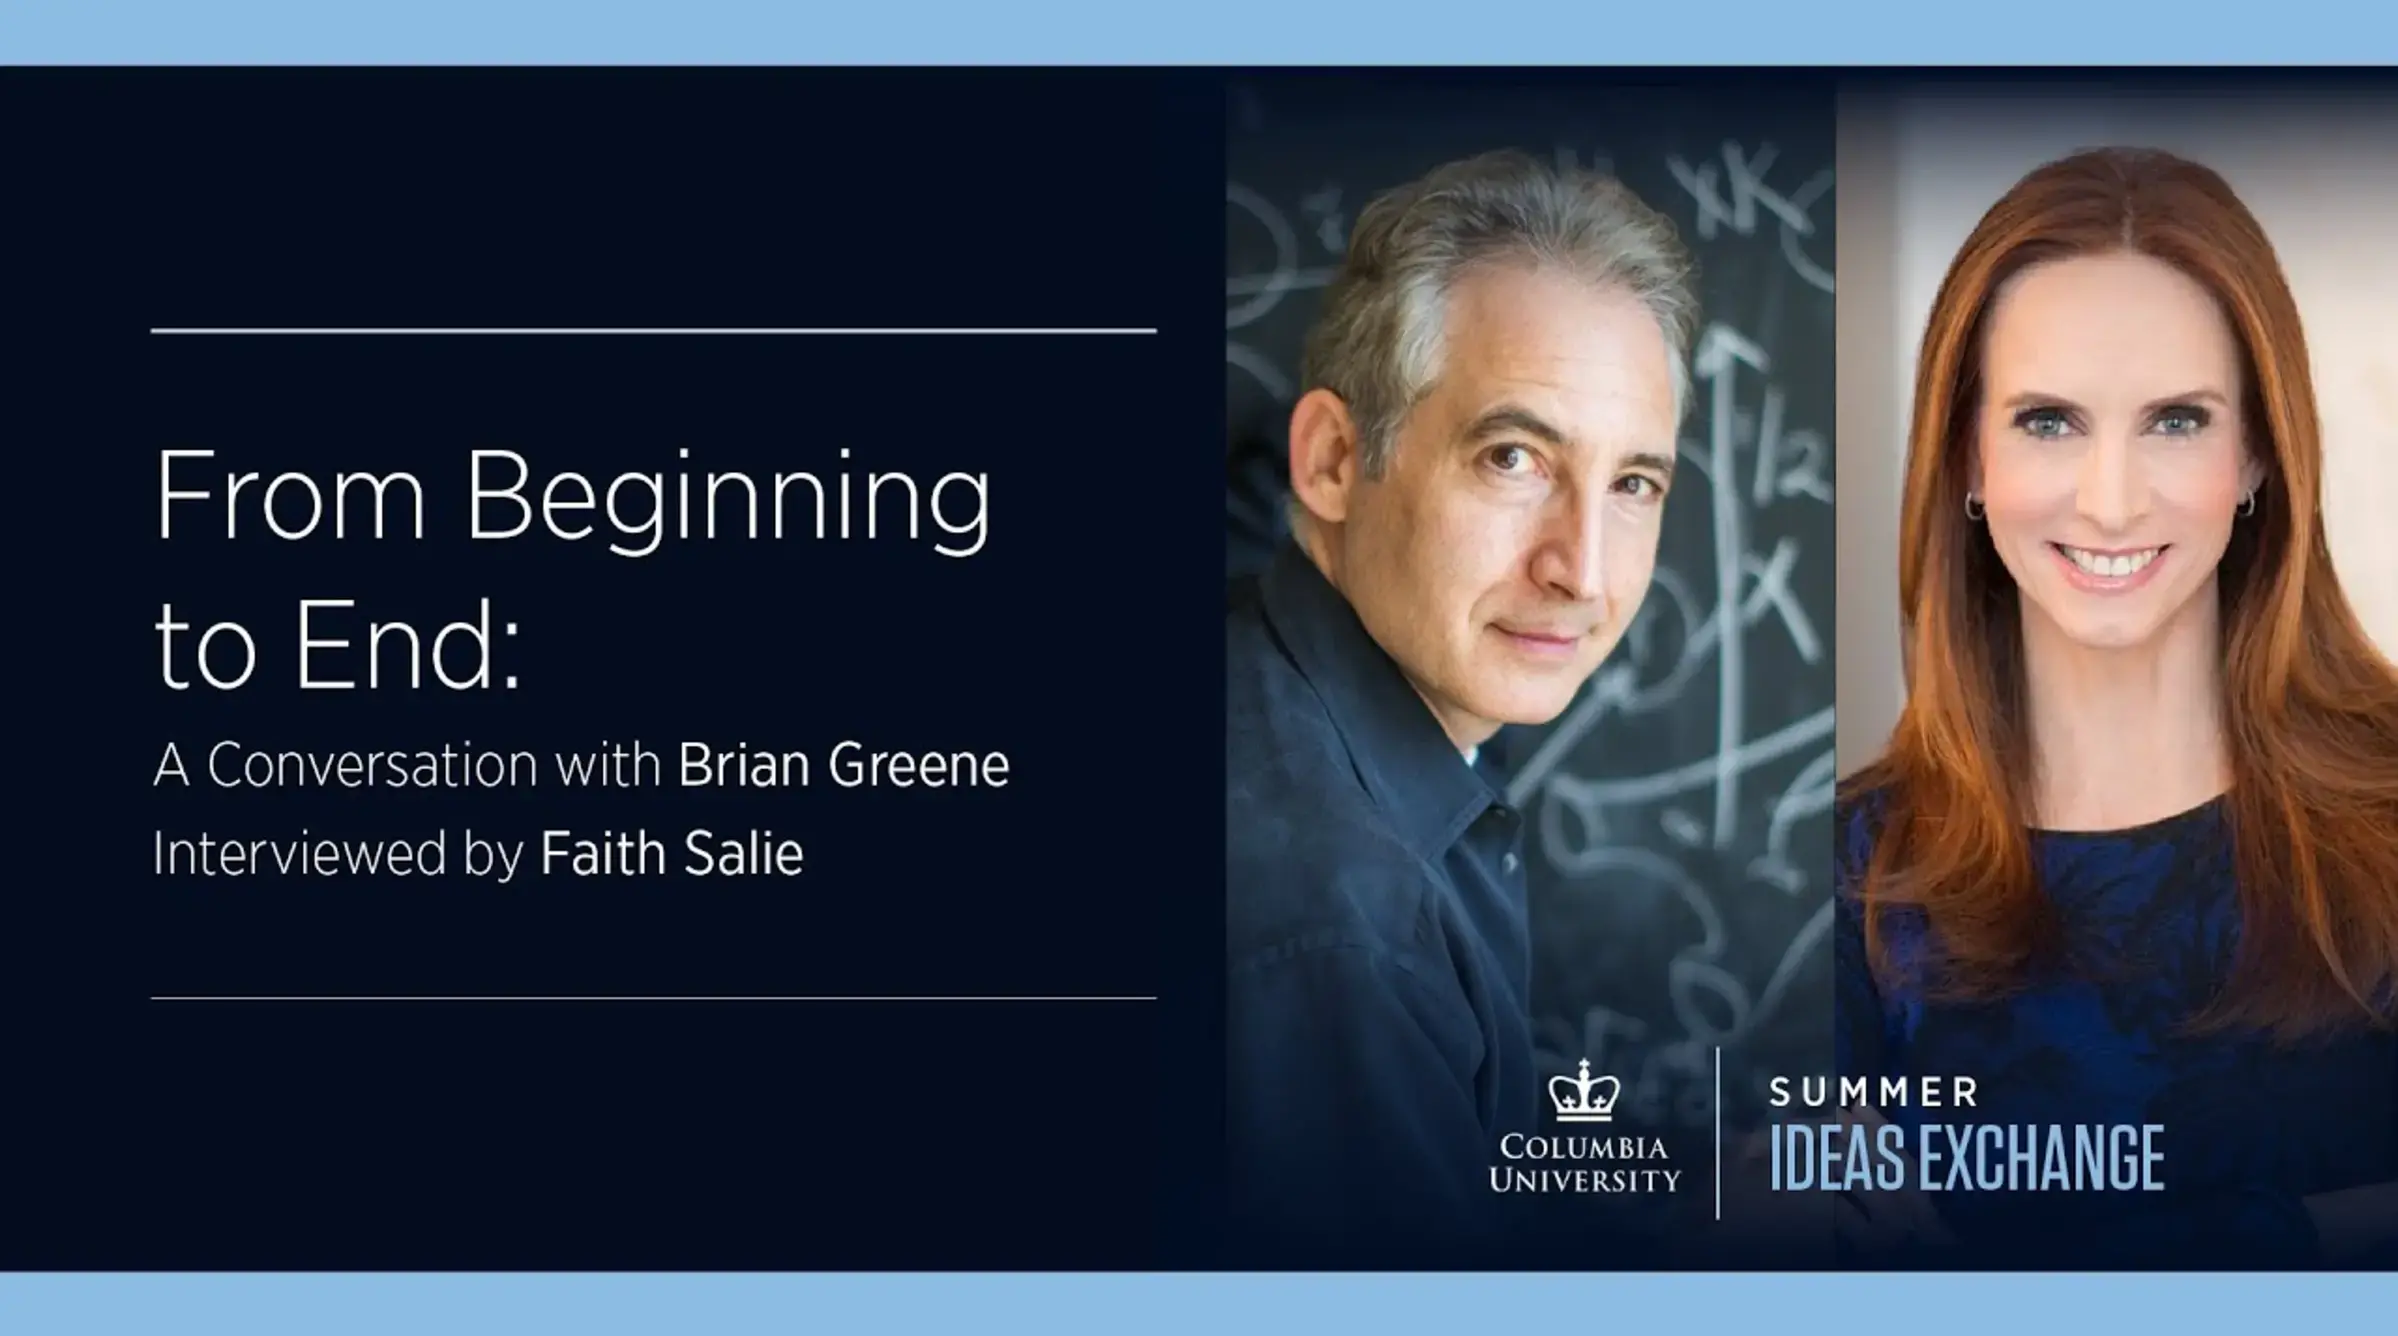 From Beginning to End: A Conversation with Brian Greene